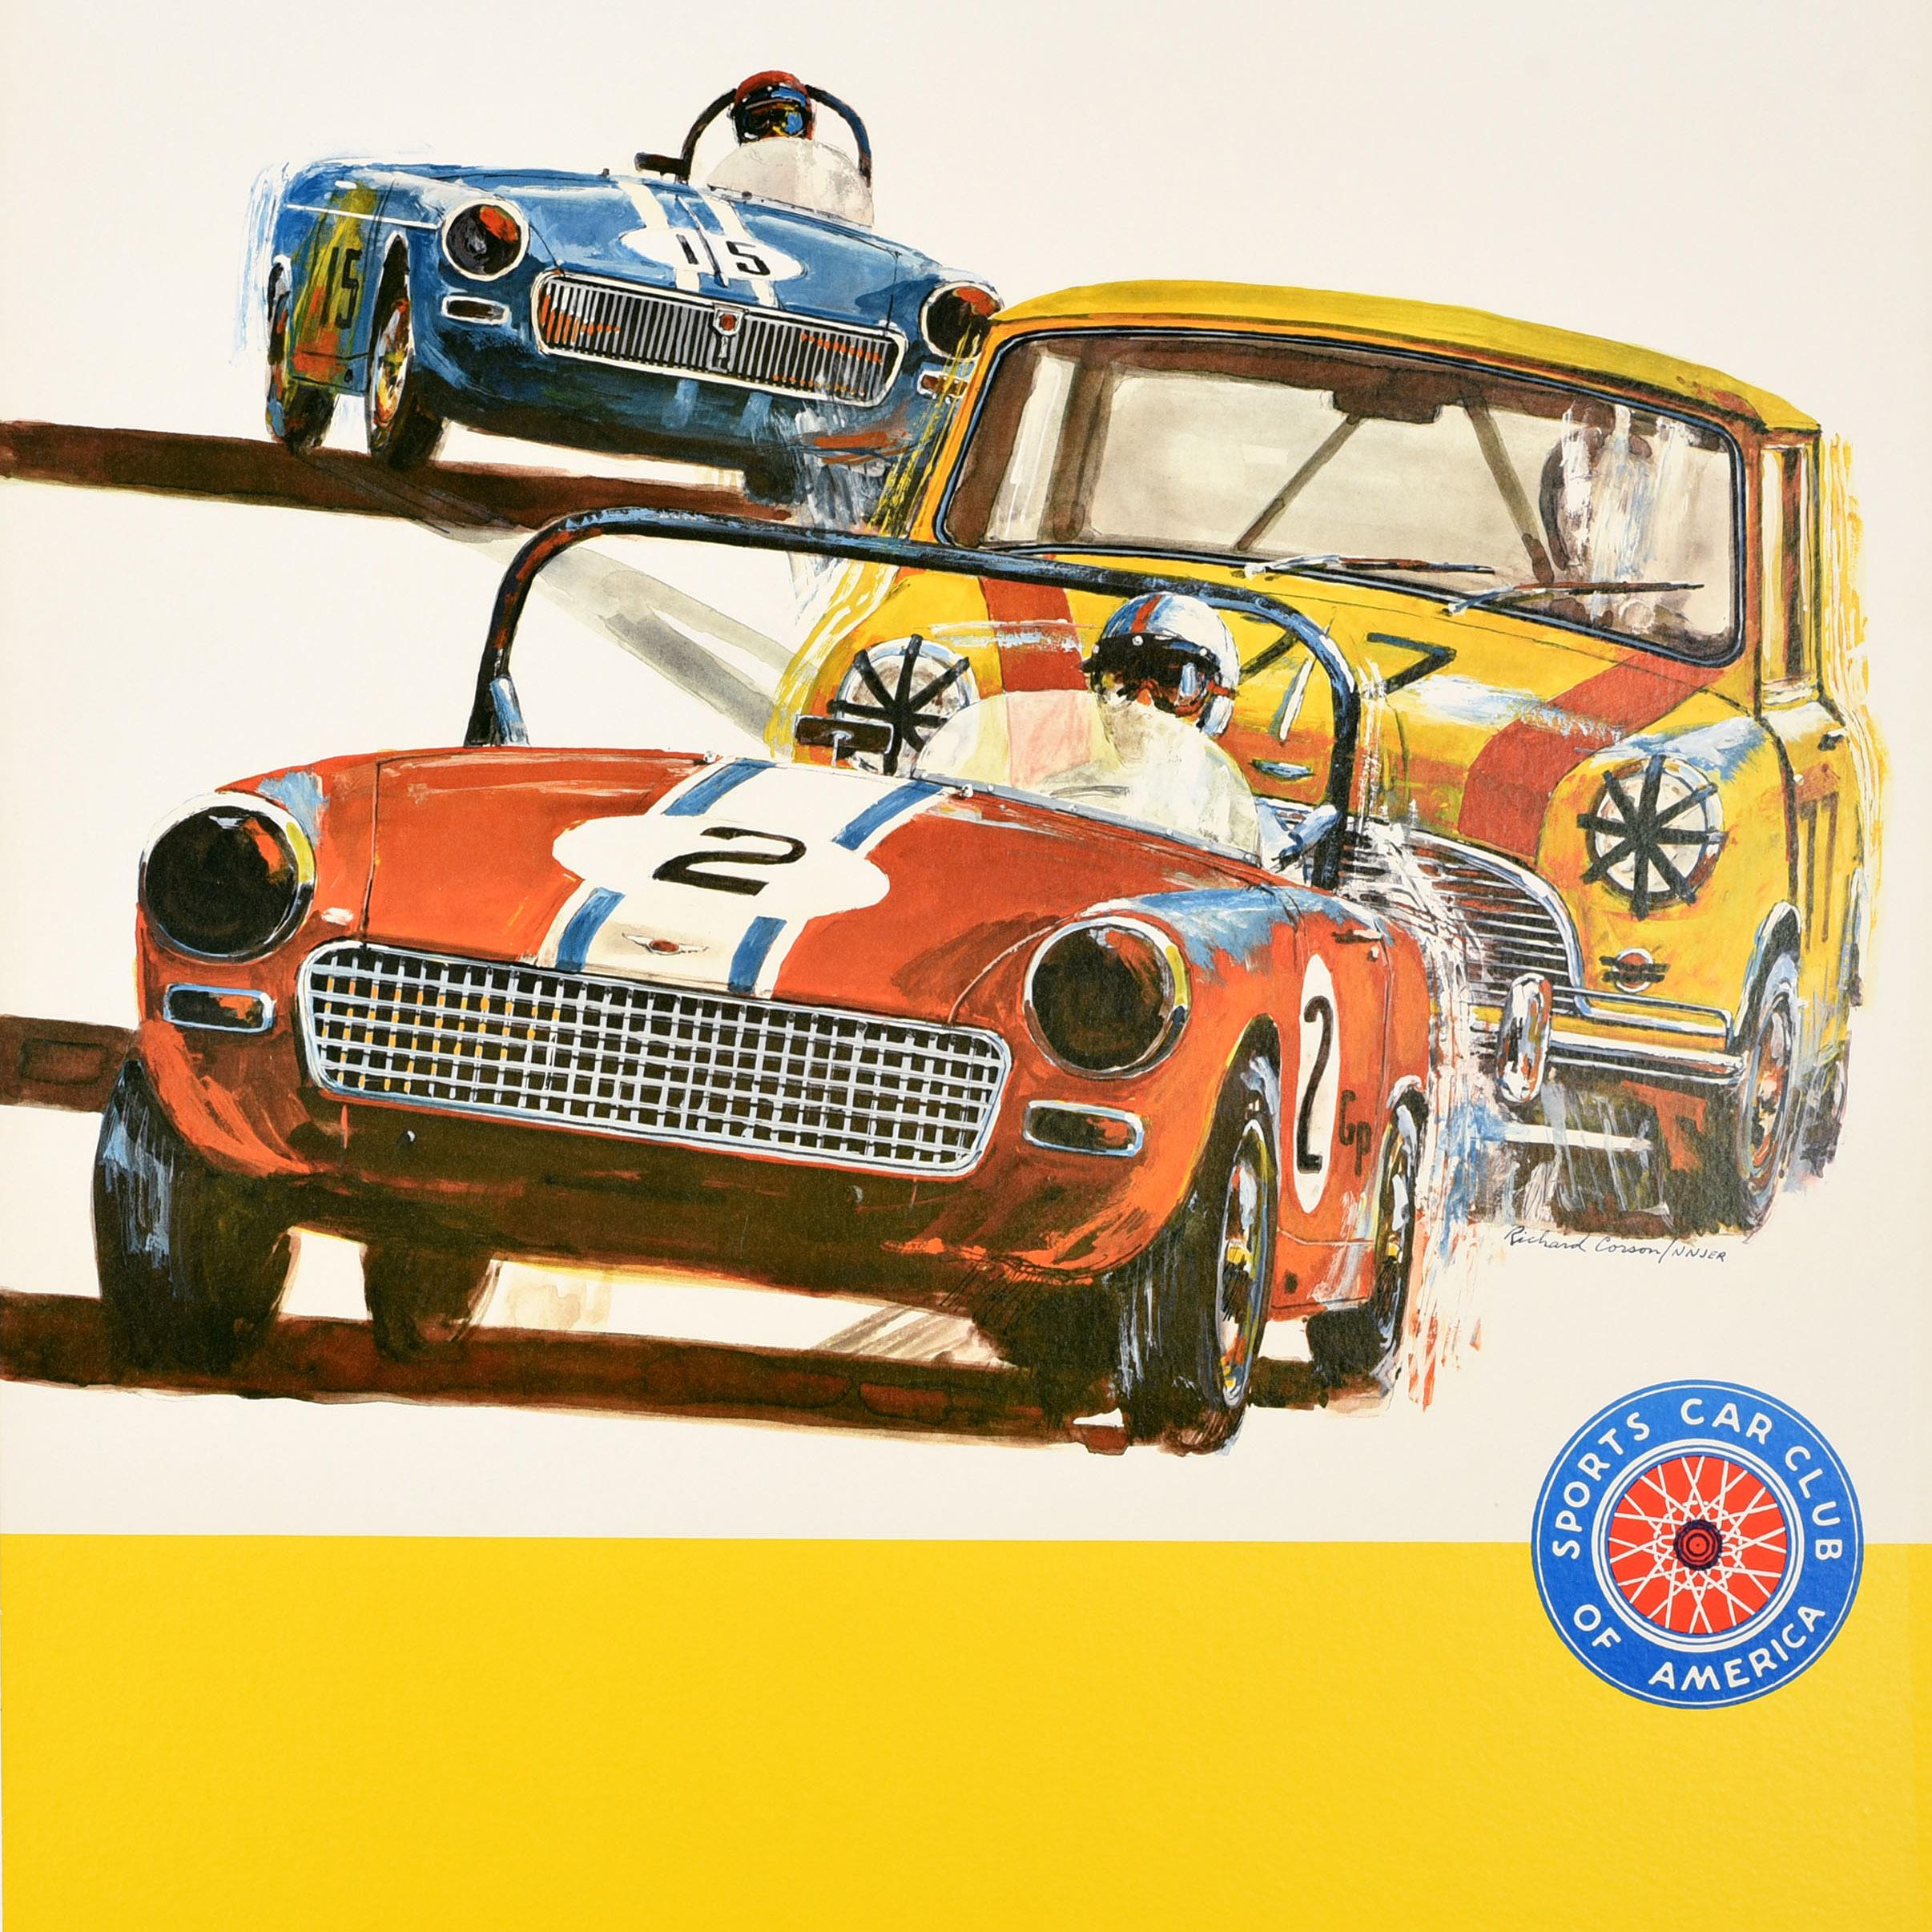 Original vintage motorsport poster for the Sports Car Club of America Sportsmanship Demands Safe Driving featuring artwork of three cars racing towards the viewer with the title text above and logo above the yellow space below. Founded in 1944 the